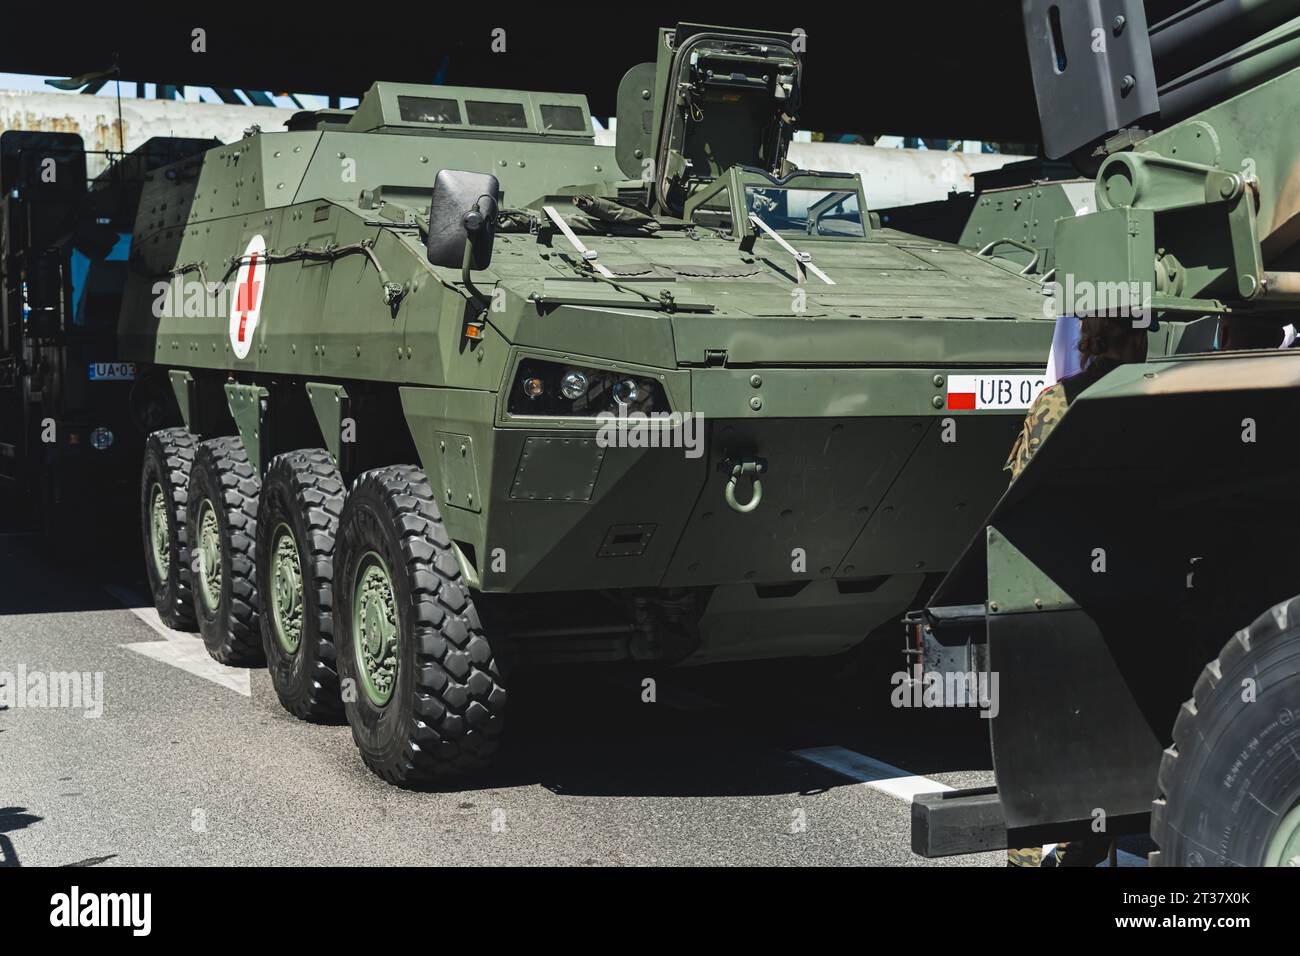 16.08.2023 Warsaw, Poland. Medical armored personnel carrier. Medical cross on the armor of an armored vehicle during open air military parade. High quality photo Stock Photo